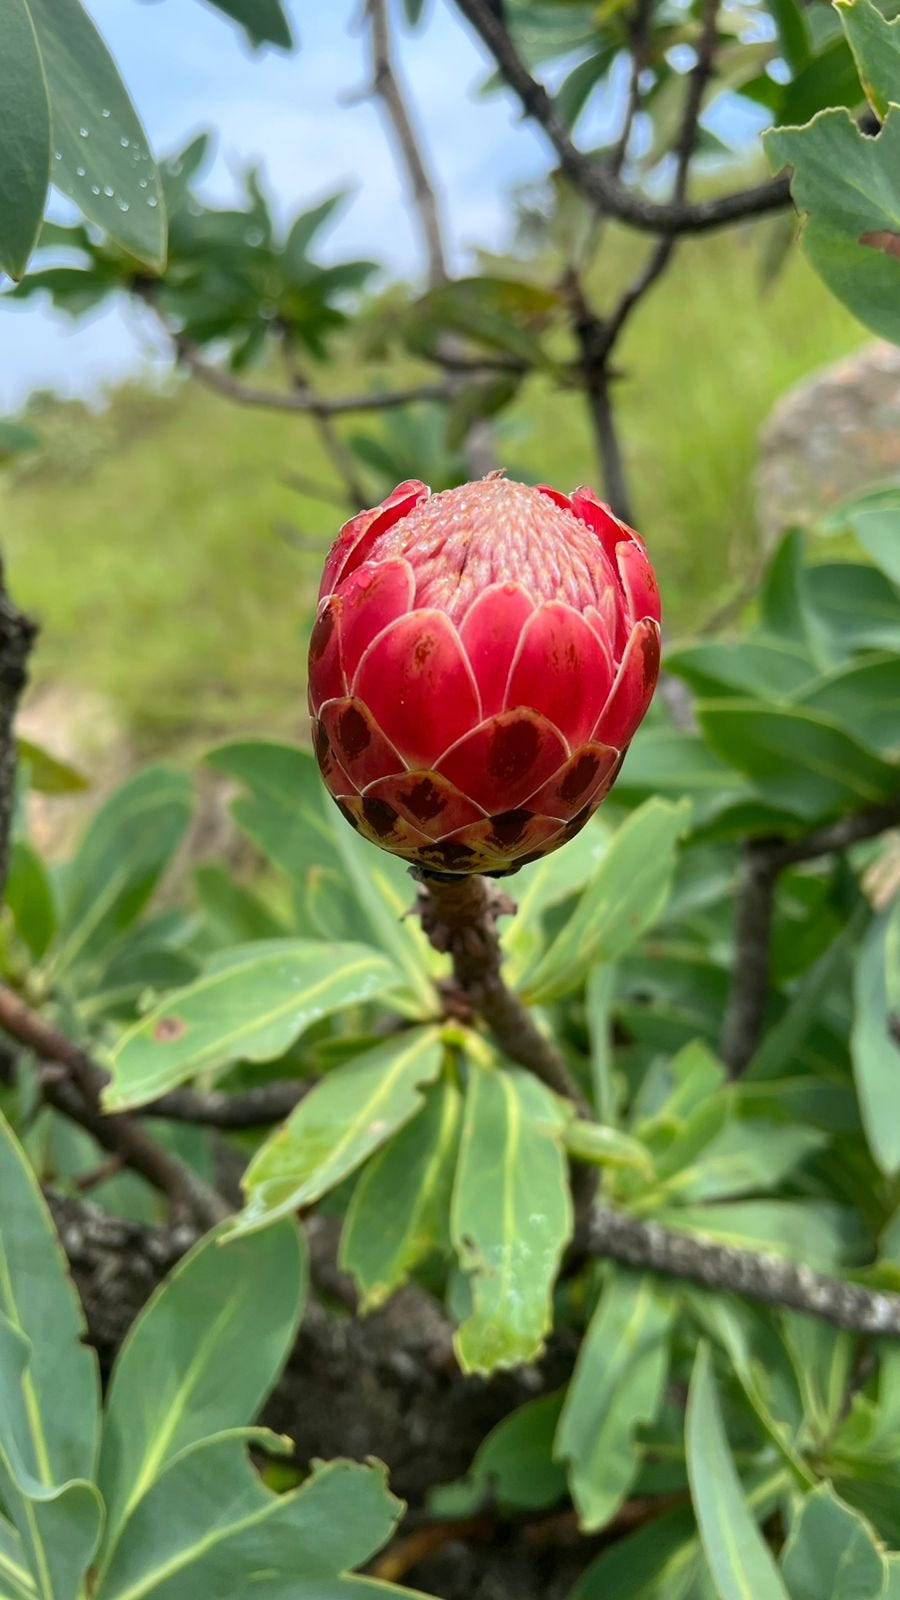 A close up of a large pink wild protea with closed leaves, spotted with dew drops and surrounded by leaves